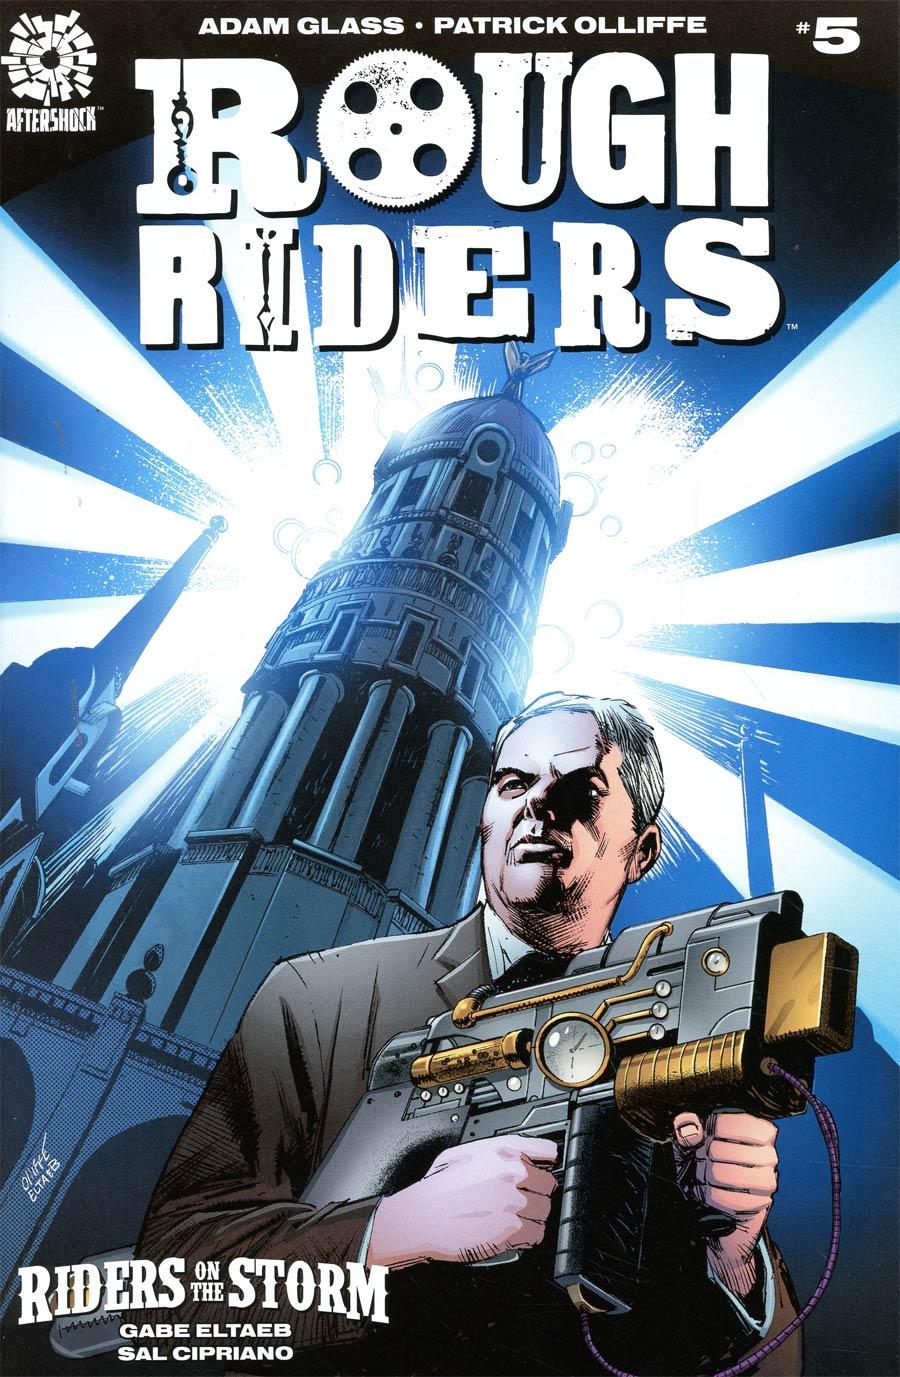 Rough Riders Riders On The Storm Vol. 1 #5